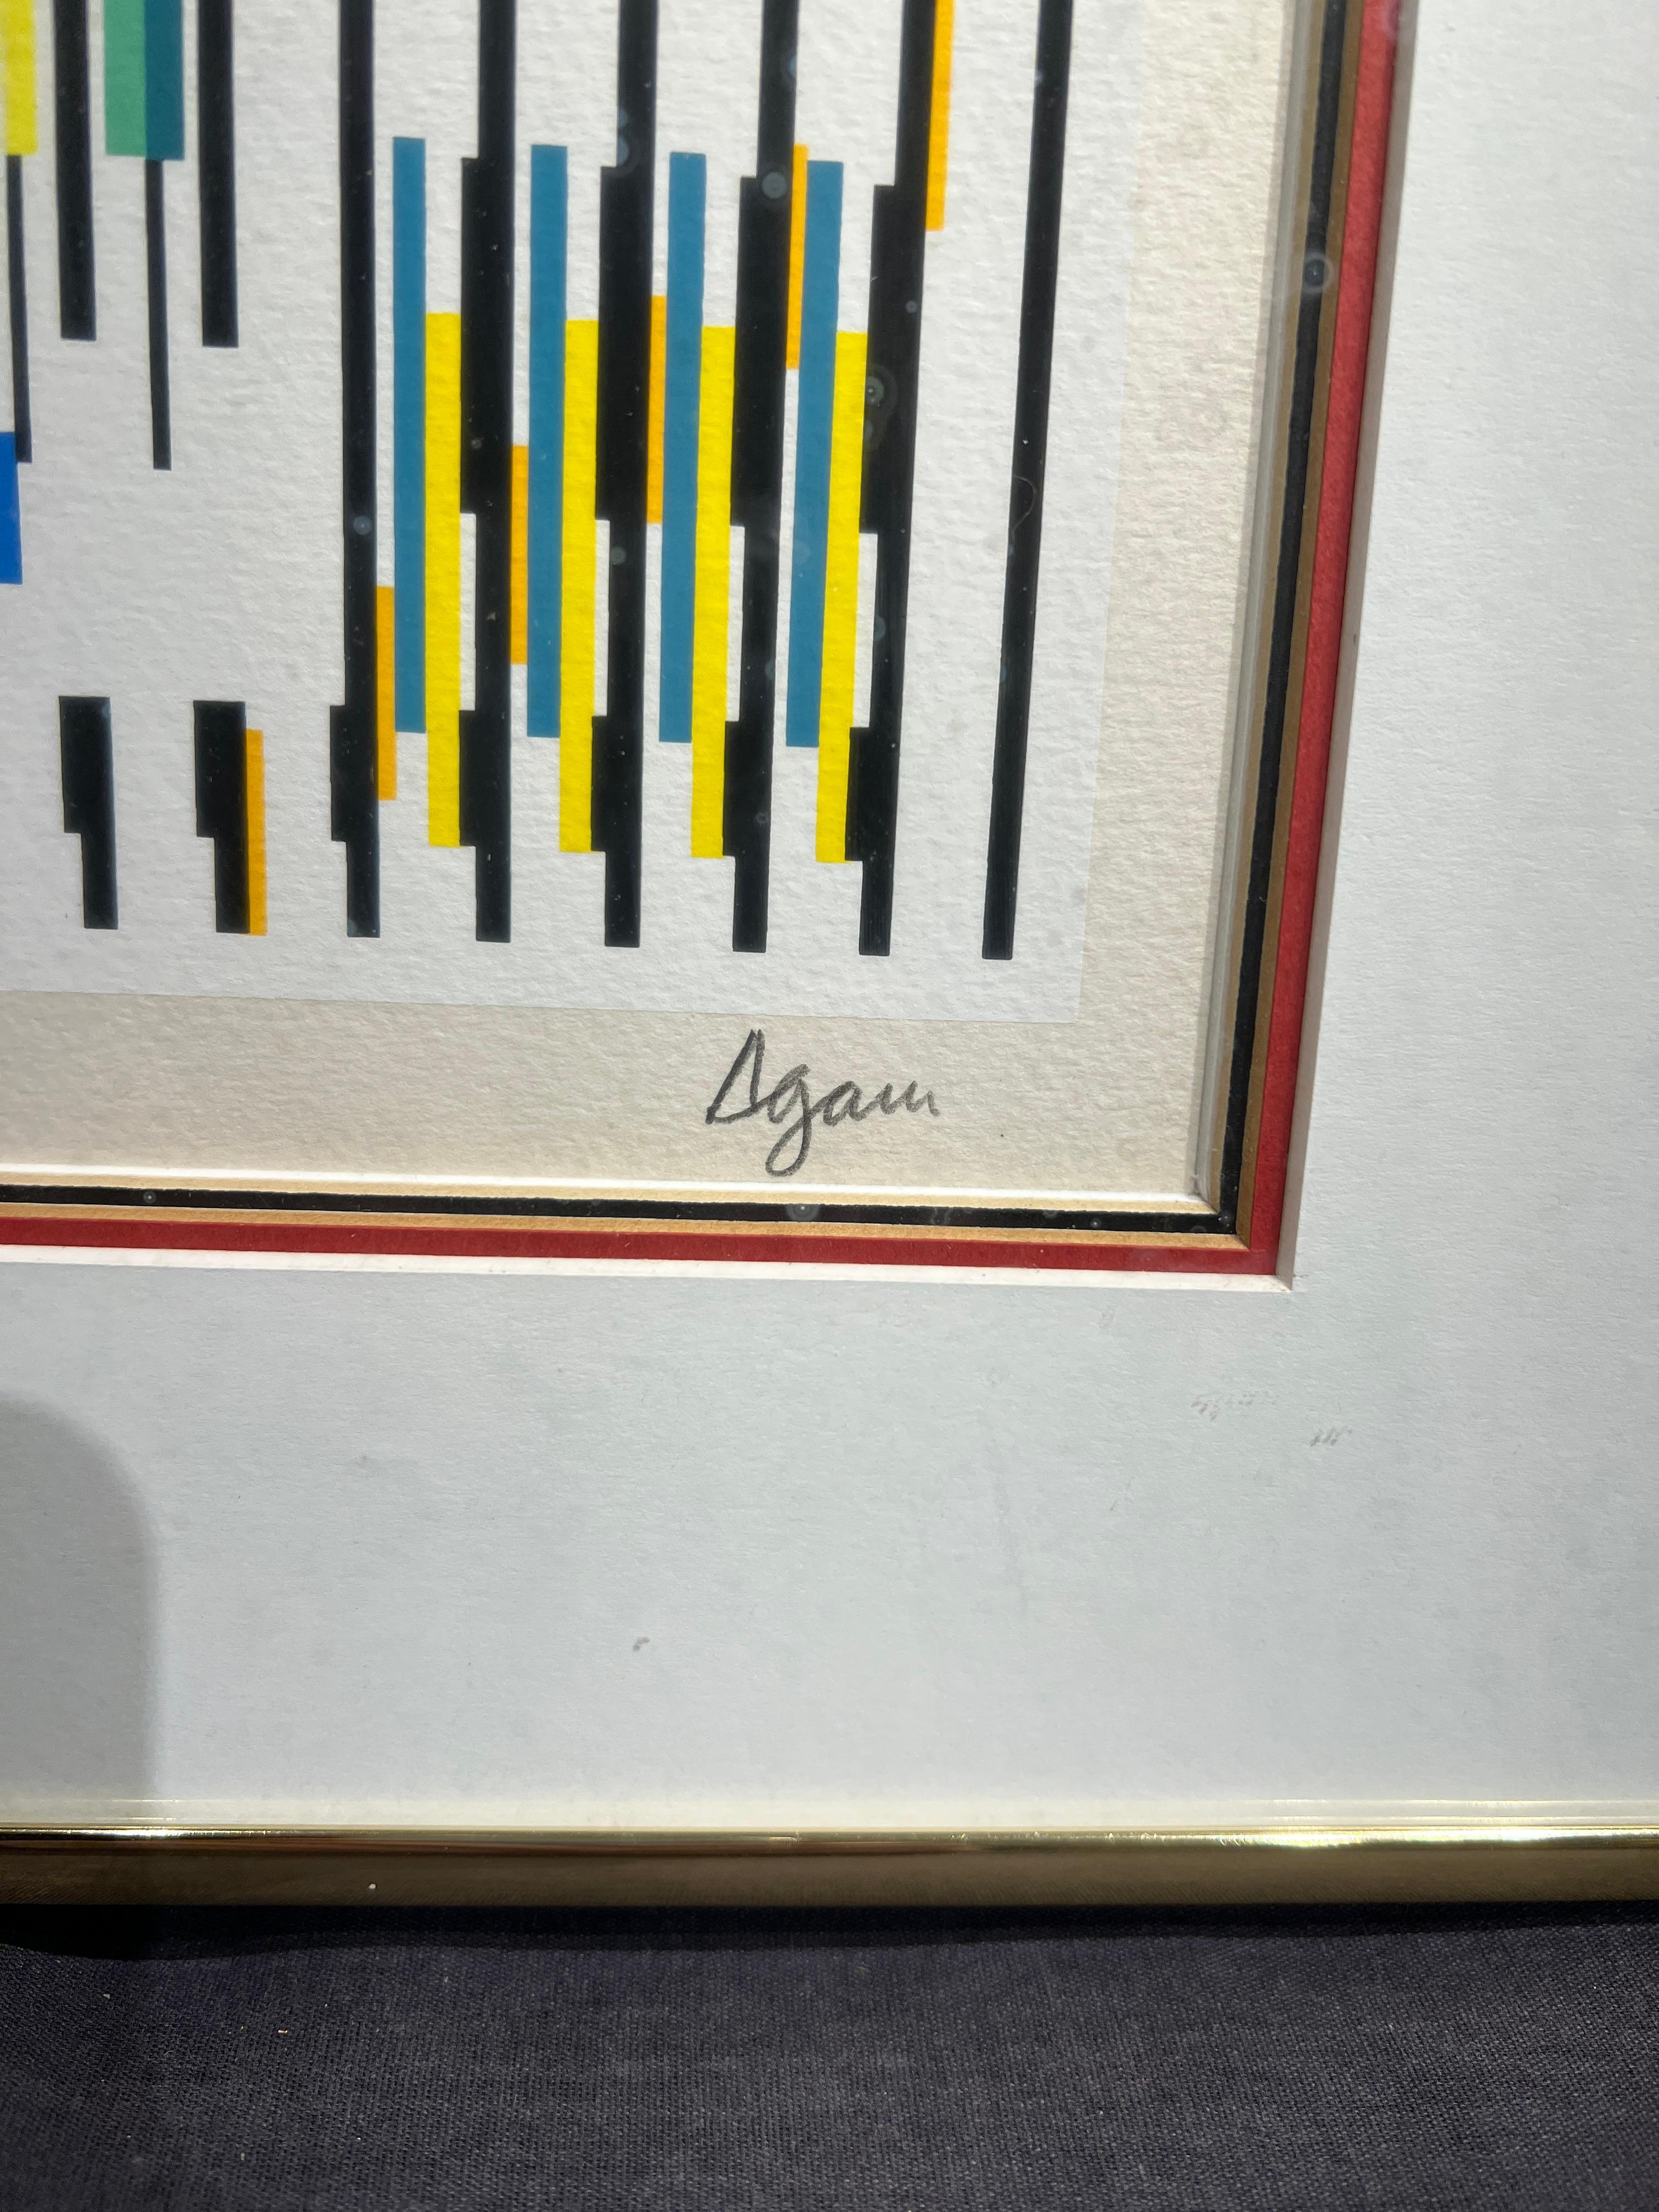 Untitled (Serigraph)
By Yaacov Agam (Israeli, b. 1928)
Signed Lower Right
Edition 56/180 Lower Left
Unframed: 20